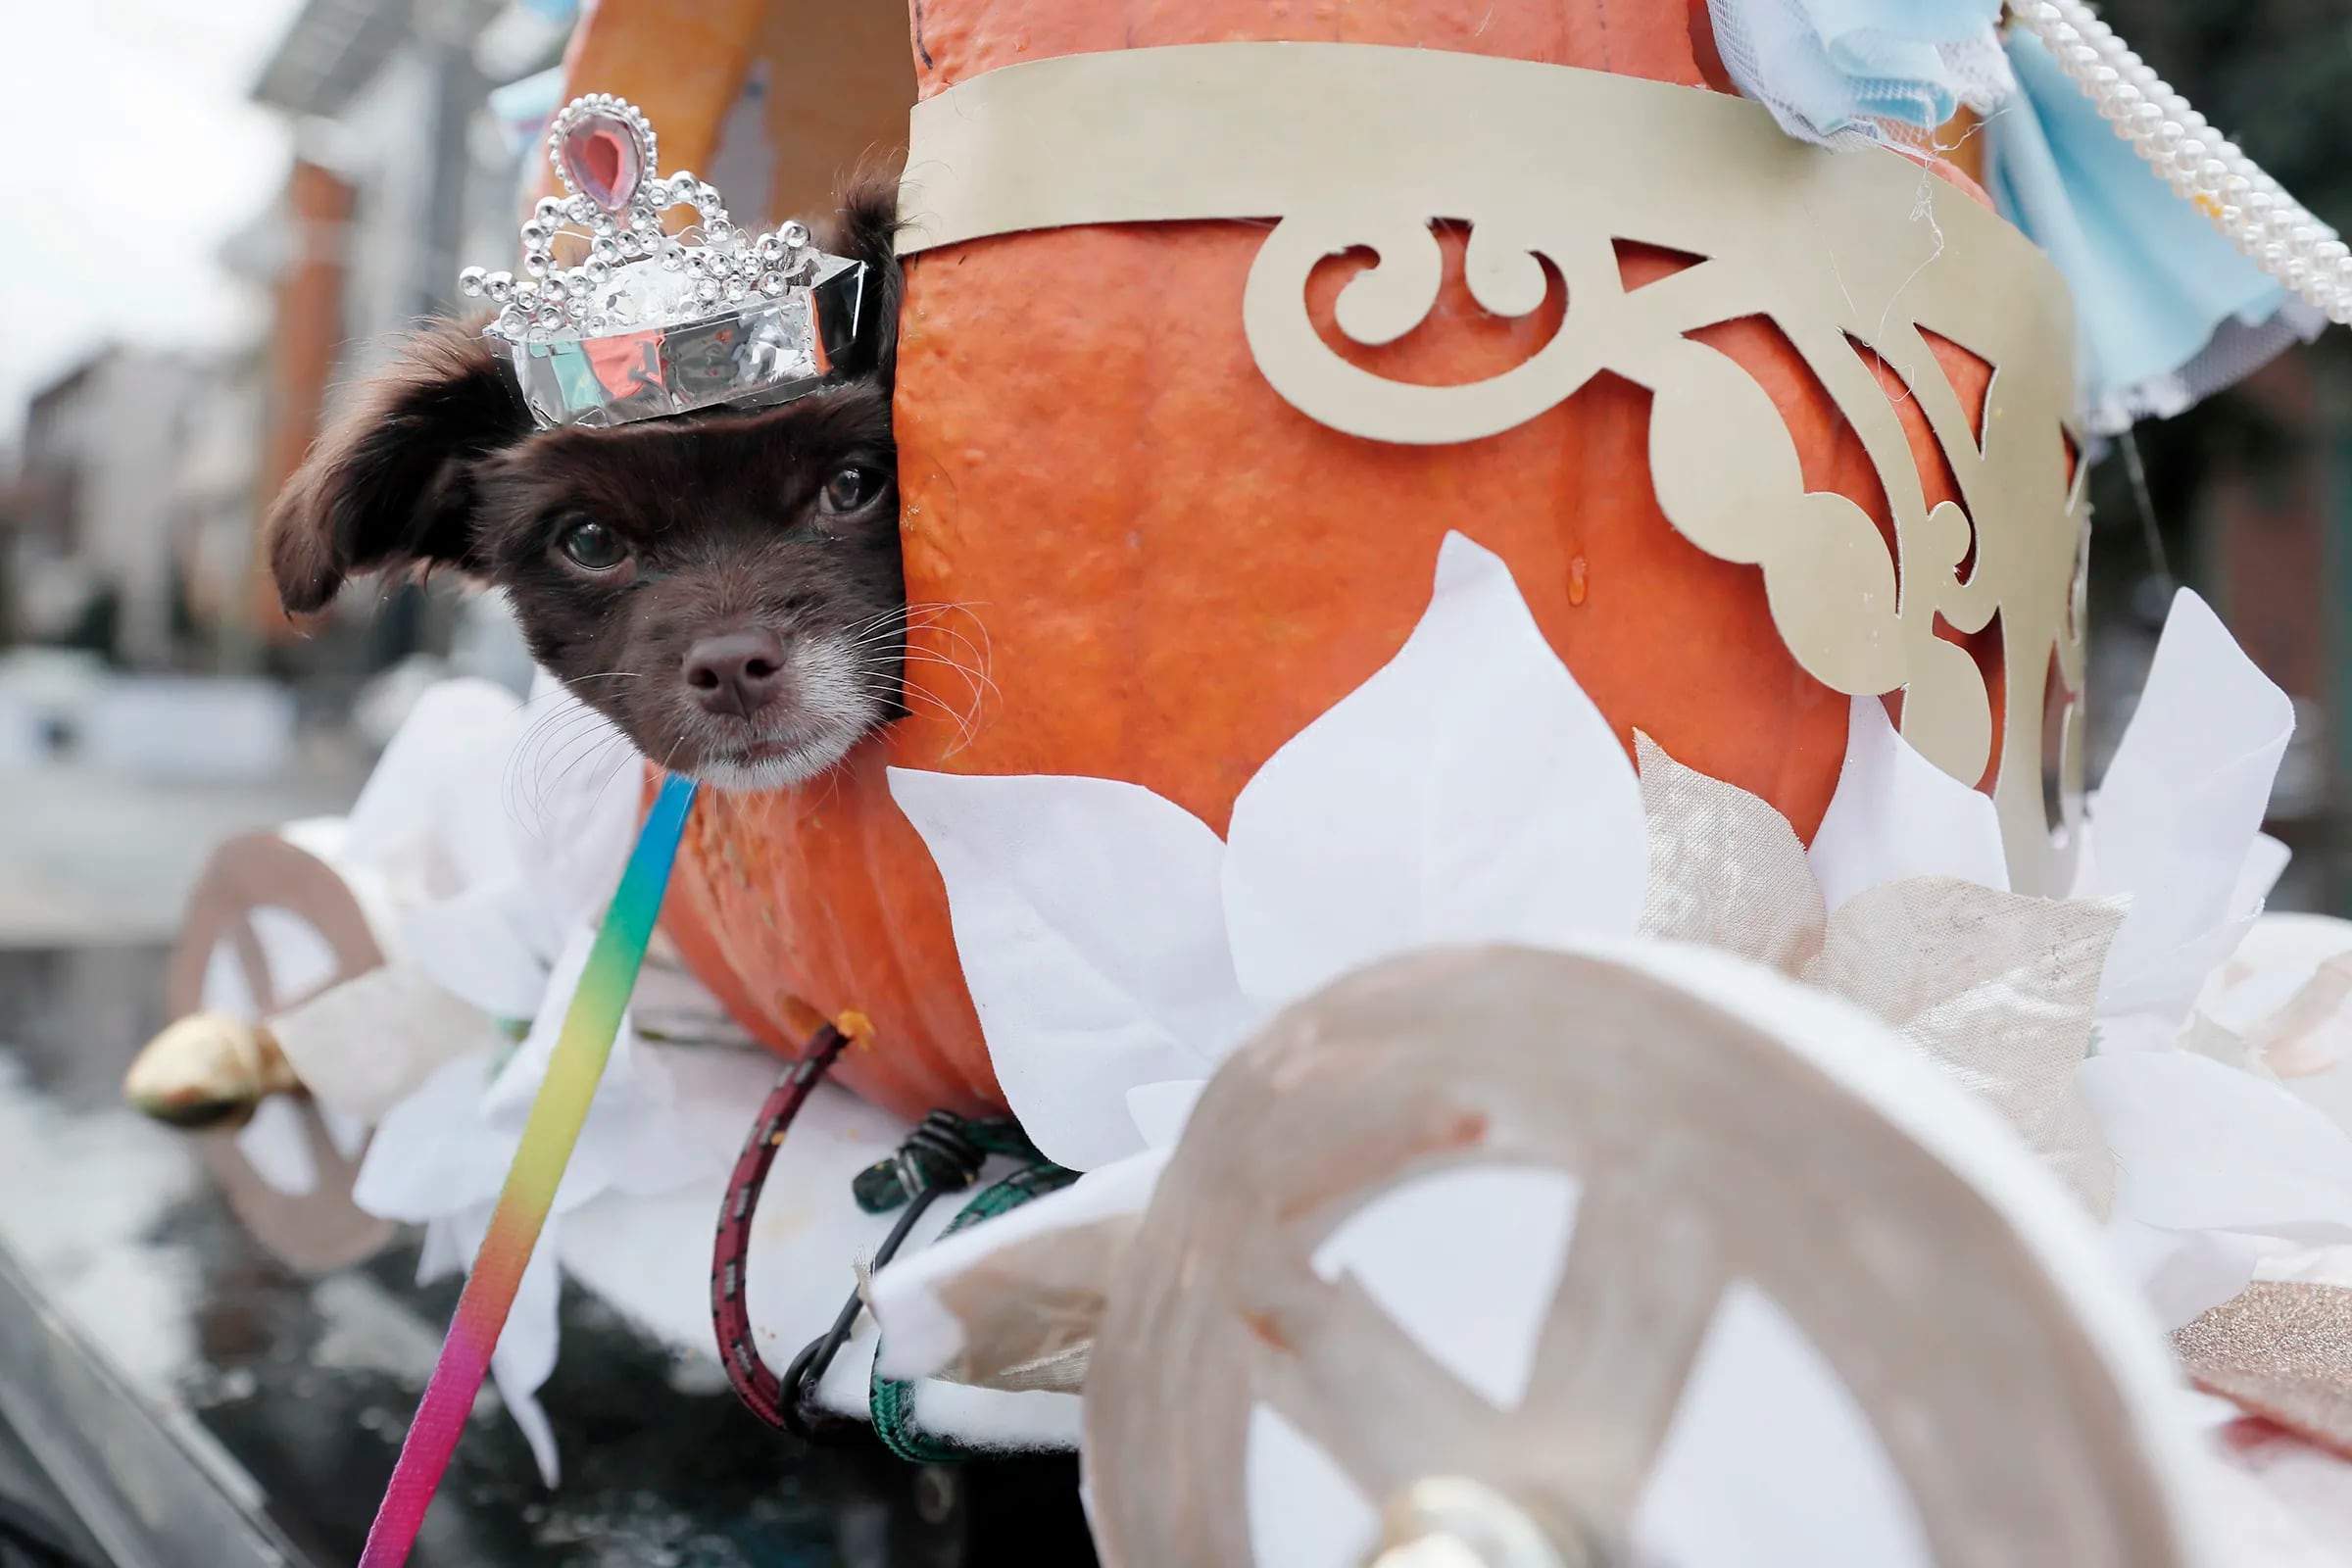 11-week-old Dutchess, who is dressed as Cinderella, peeks out of her pumpkin carriage during HOUND-O-Ween and Fall Fest, sponsored by Street Tails Animal Rescue in the Northern Liberties neighborhood. Dutchess is owned by Angelina and Joeleen Connuli of Phila. and she took the prize for best in show.